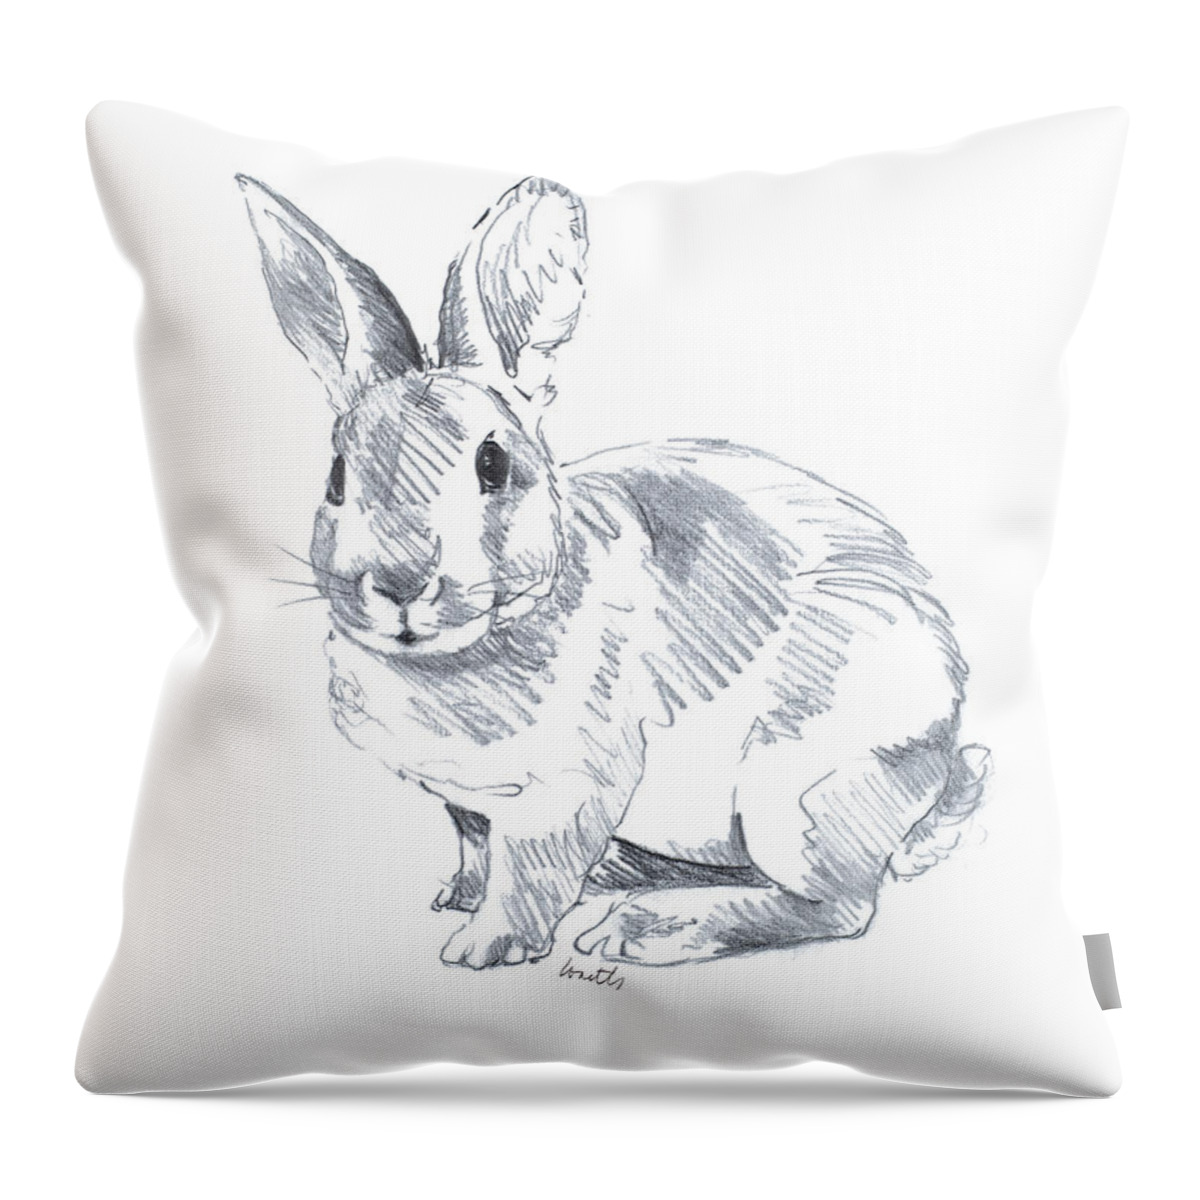 Sketched Throw Pillow featuring the drawing Sketched Rabbit II by Lanie Loreth